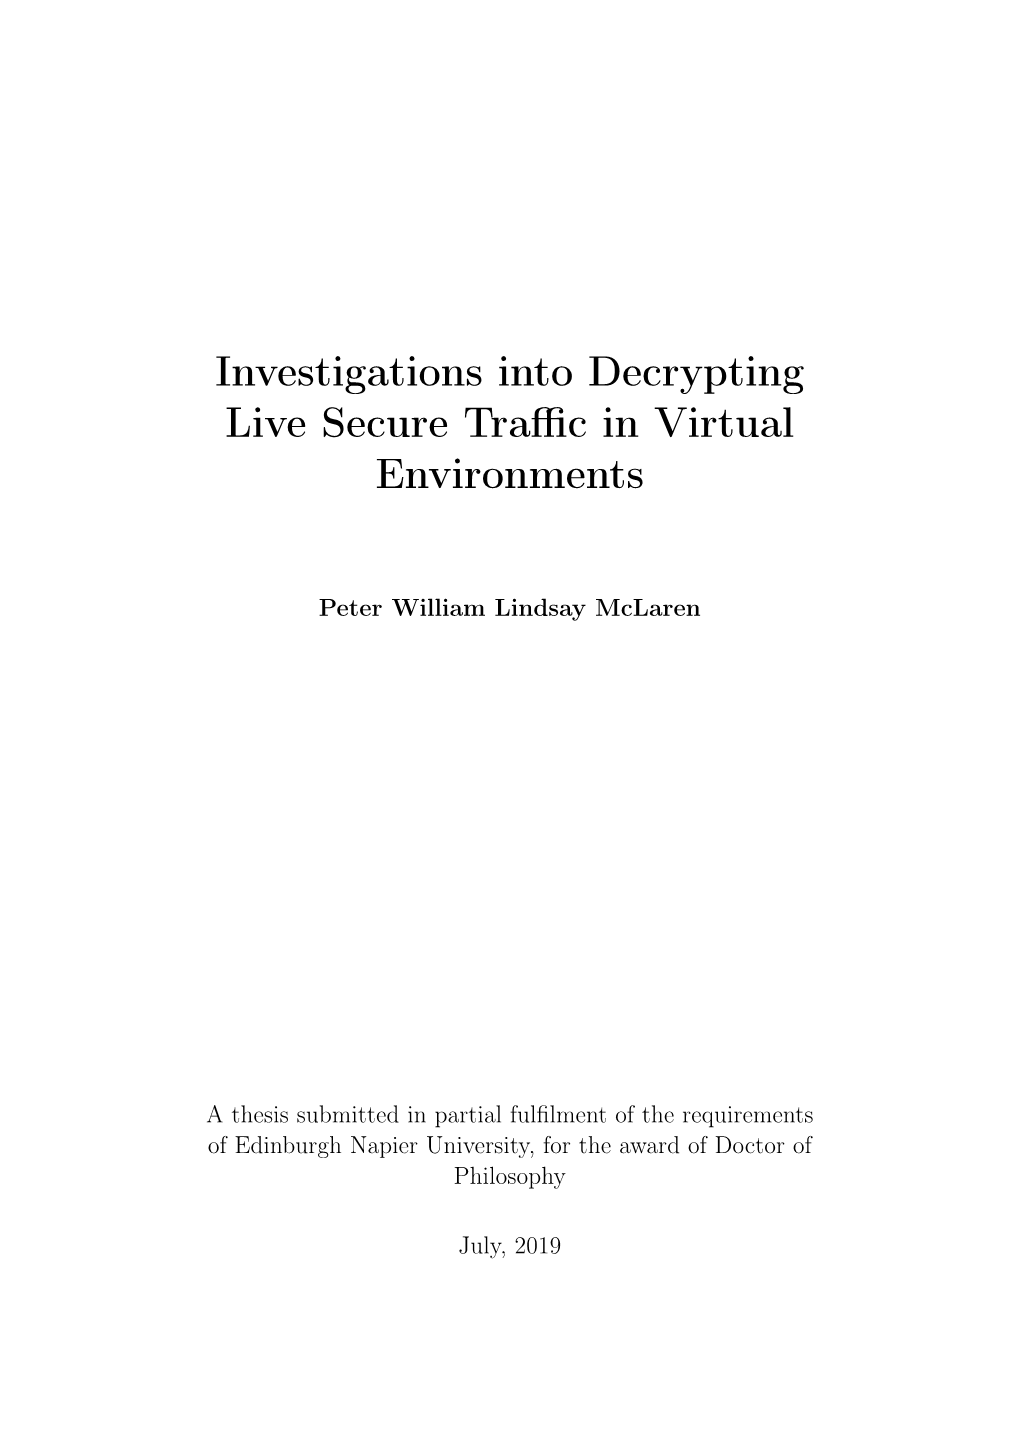 Investigations Into Decrypting Live Secure Traffic in Virtual Environments